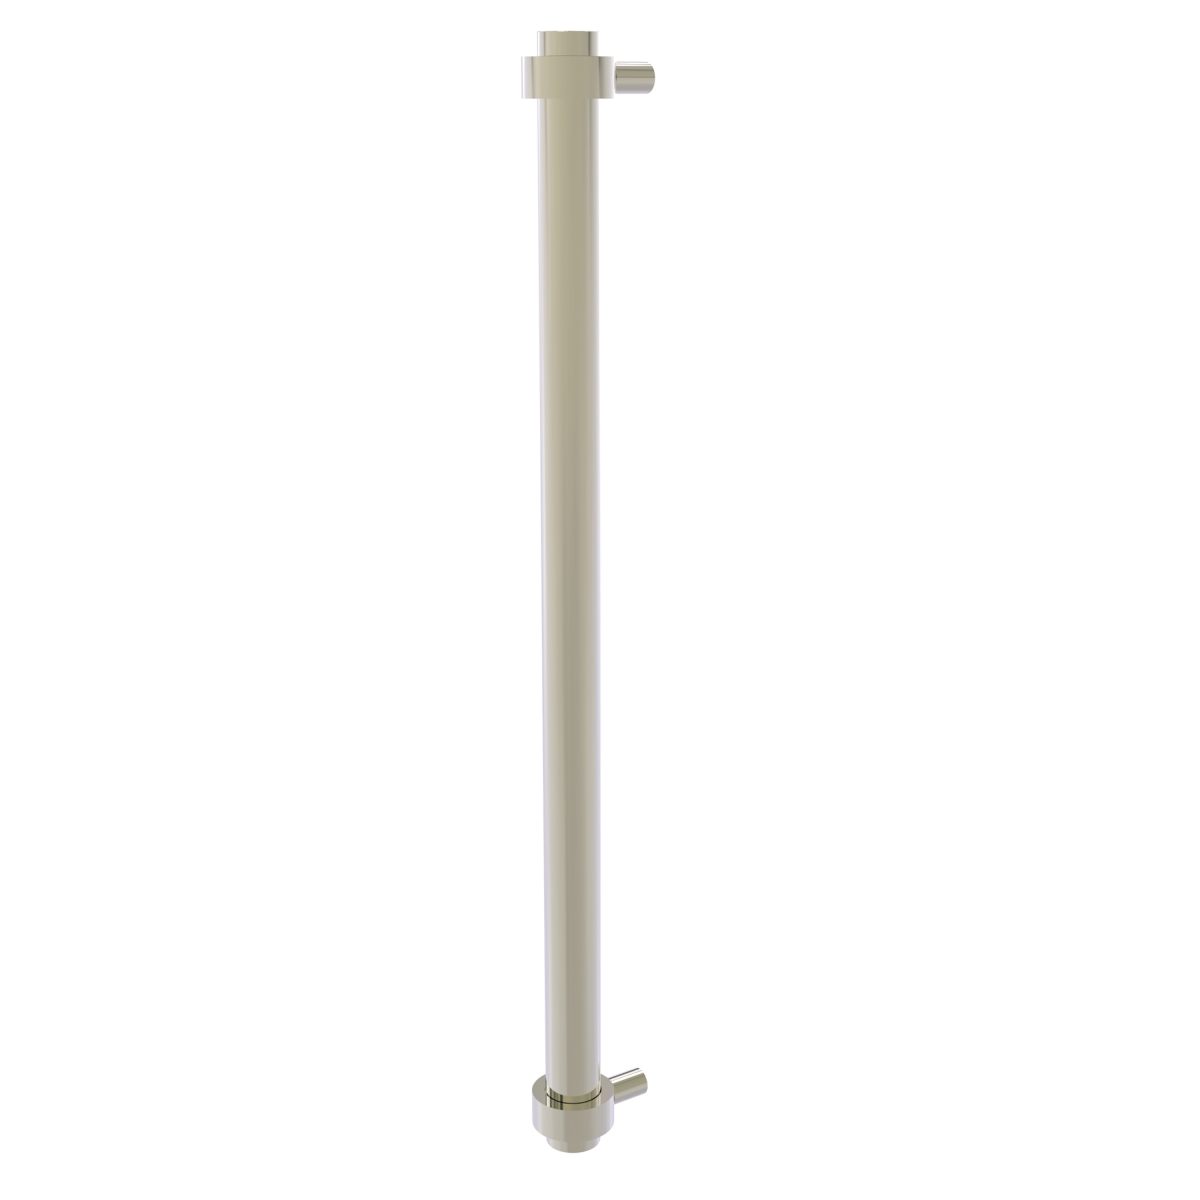 Allied Brass 402-RP-PNI 18 in. Refrigerator Pull, Polished Nickel - 5.3 x 2.9 x 18 in.